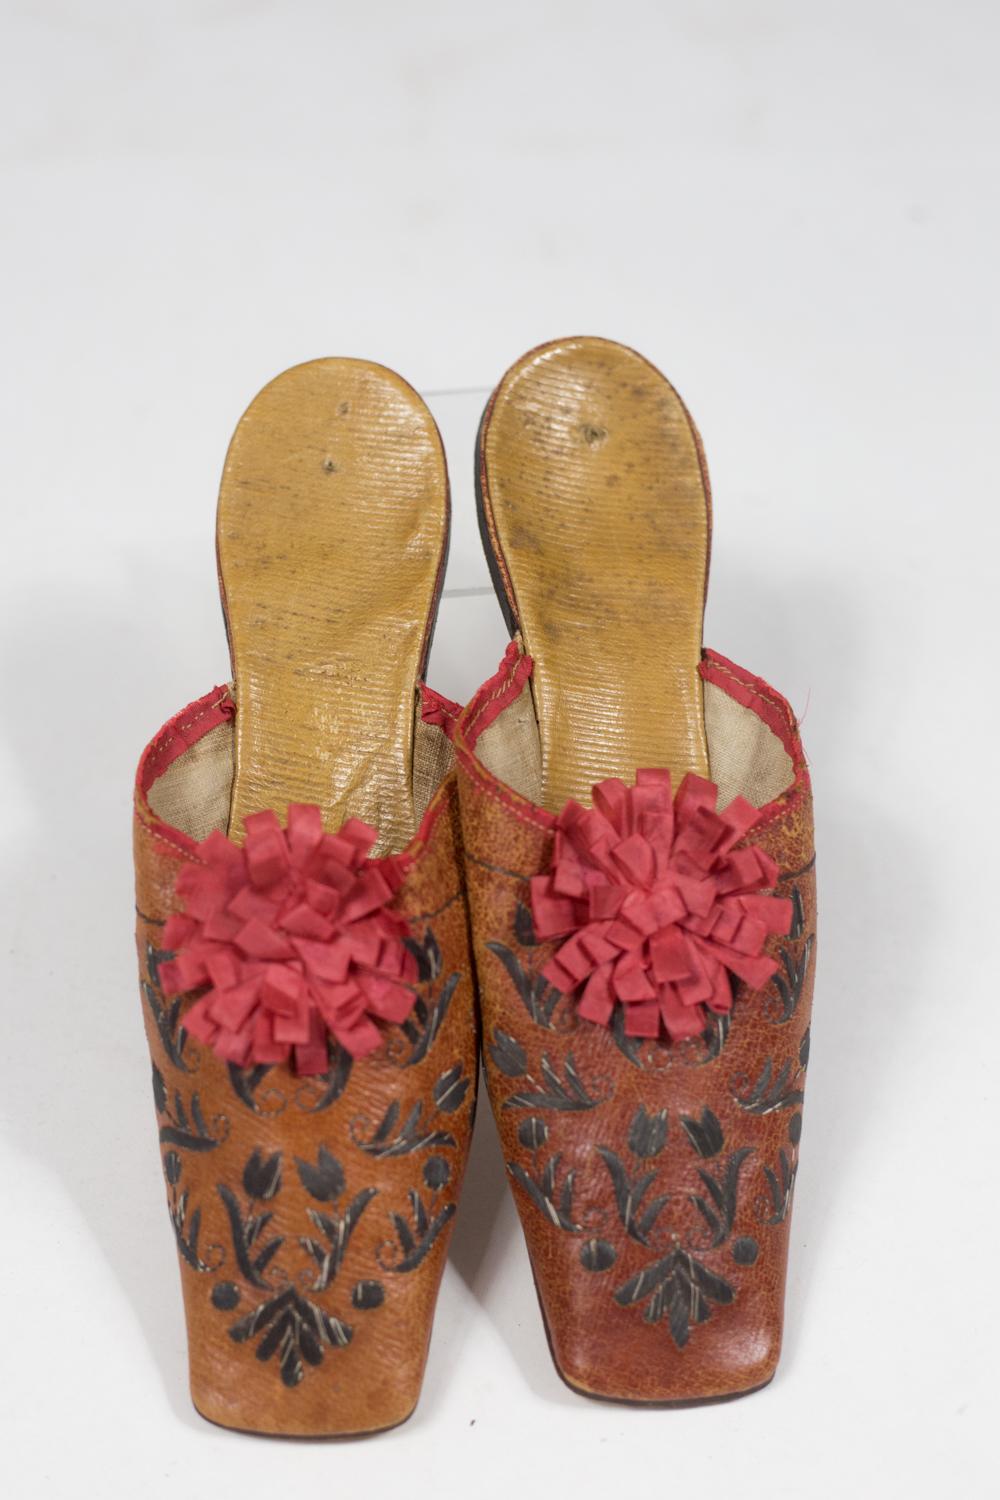 Circa 1790/1820
France
 
Beautiful collectible pair of Orientalist mules shoes dating from the early nineteenth century. Square-tipped upper in fawn leather embroidered with tulips in silver metal blade and cherry silk ribbon cassocks. Red silk